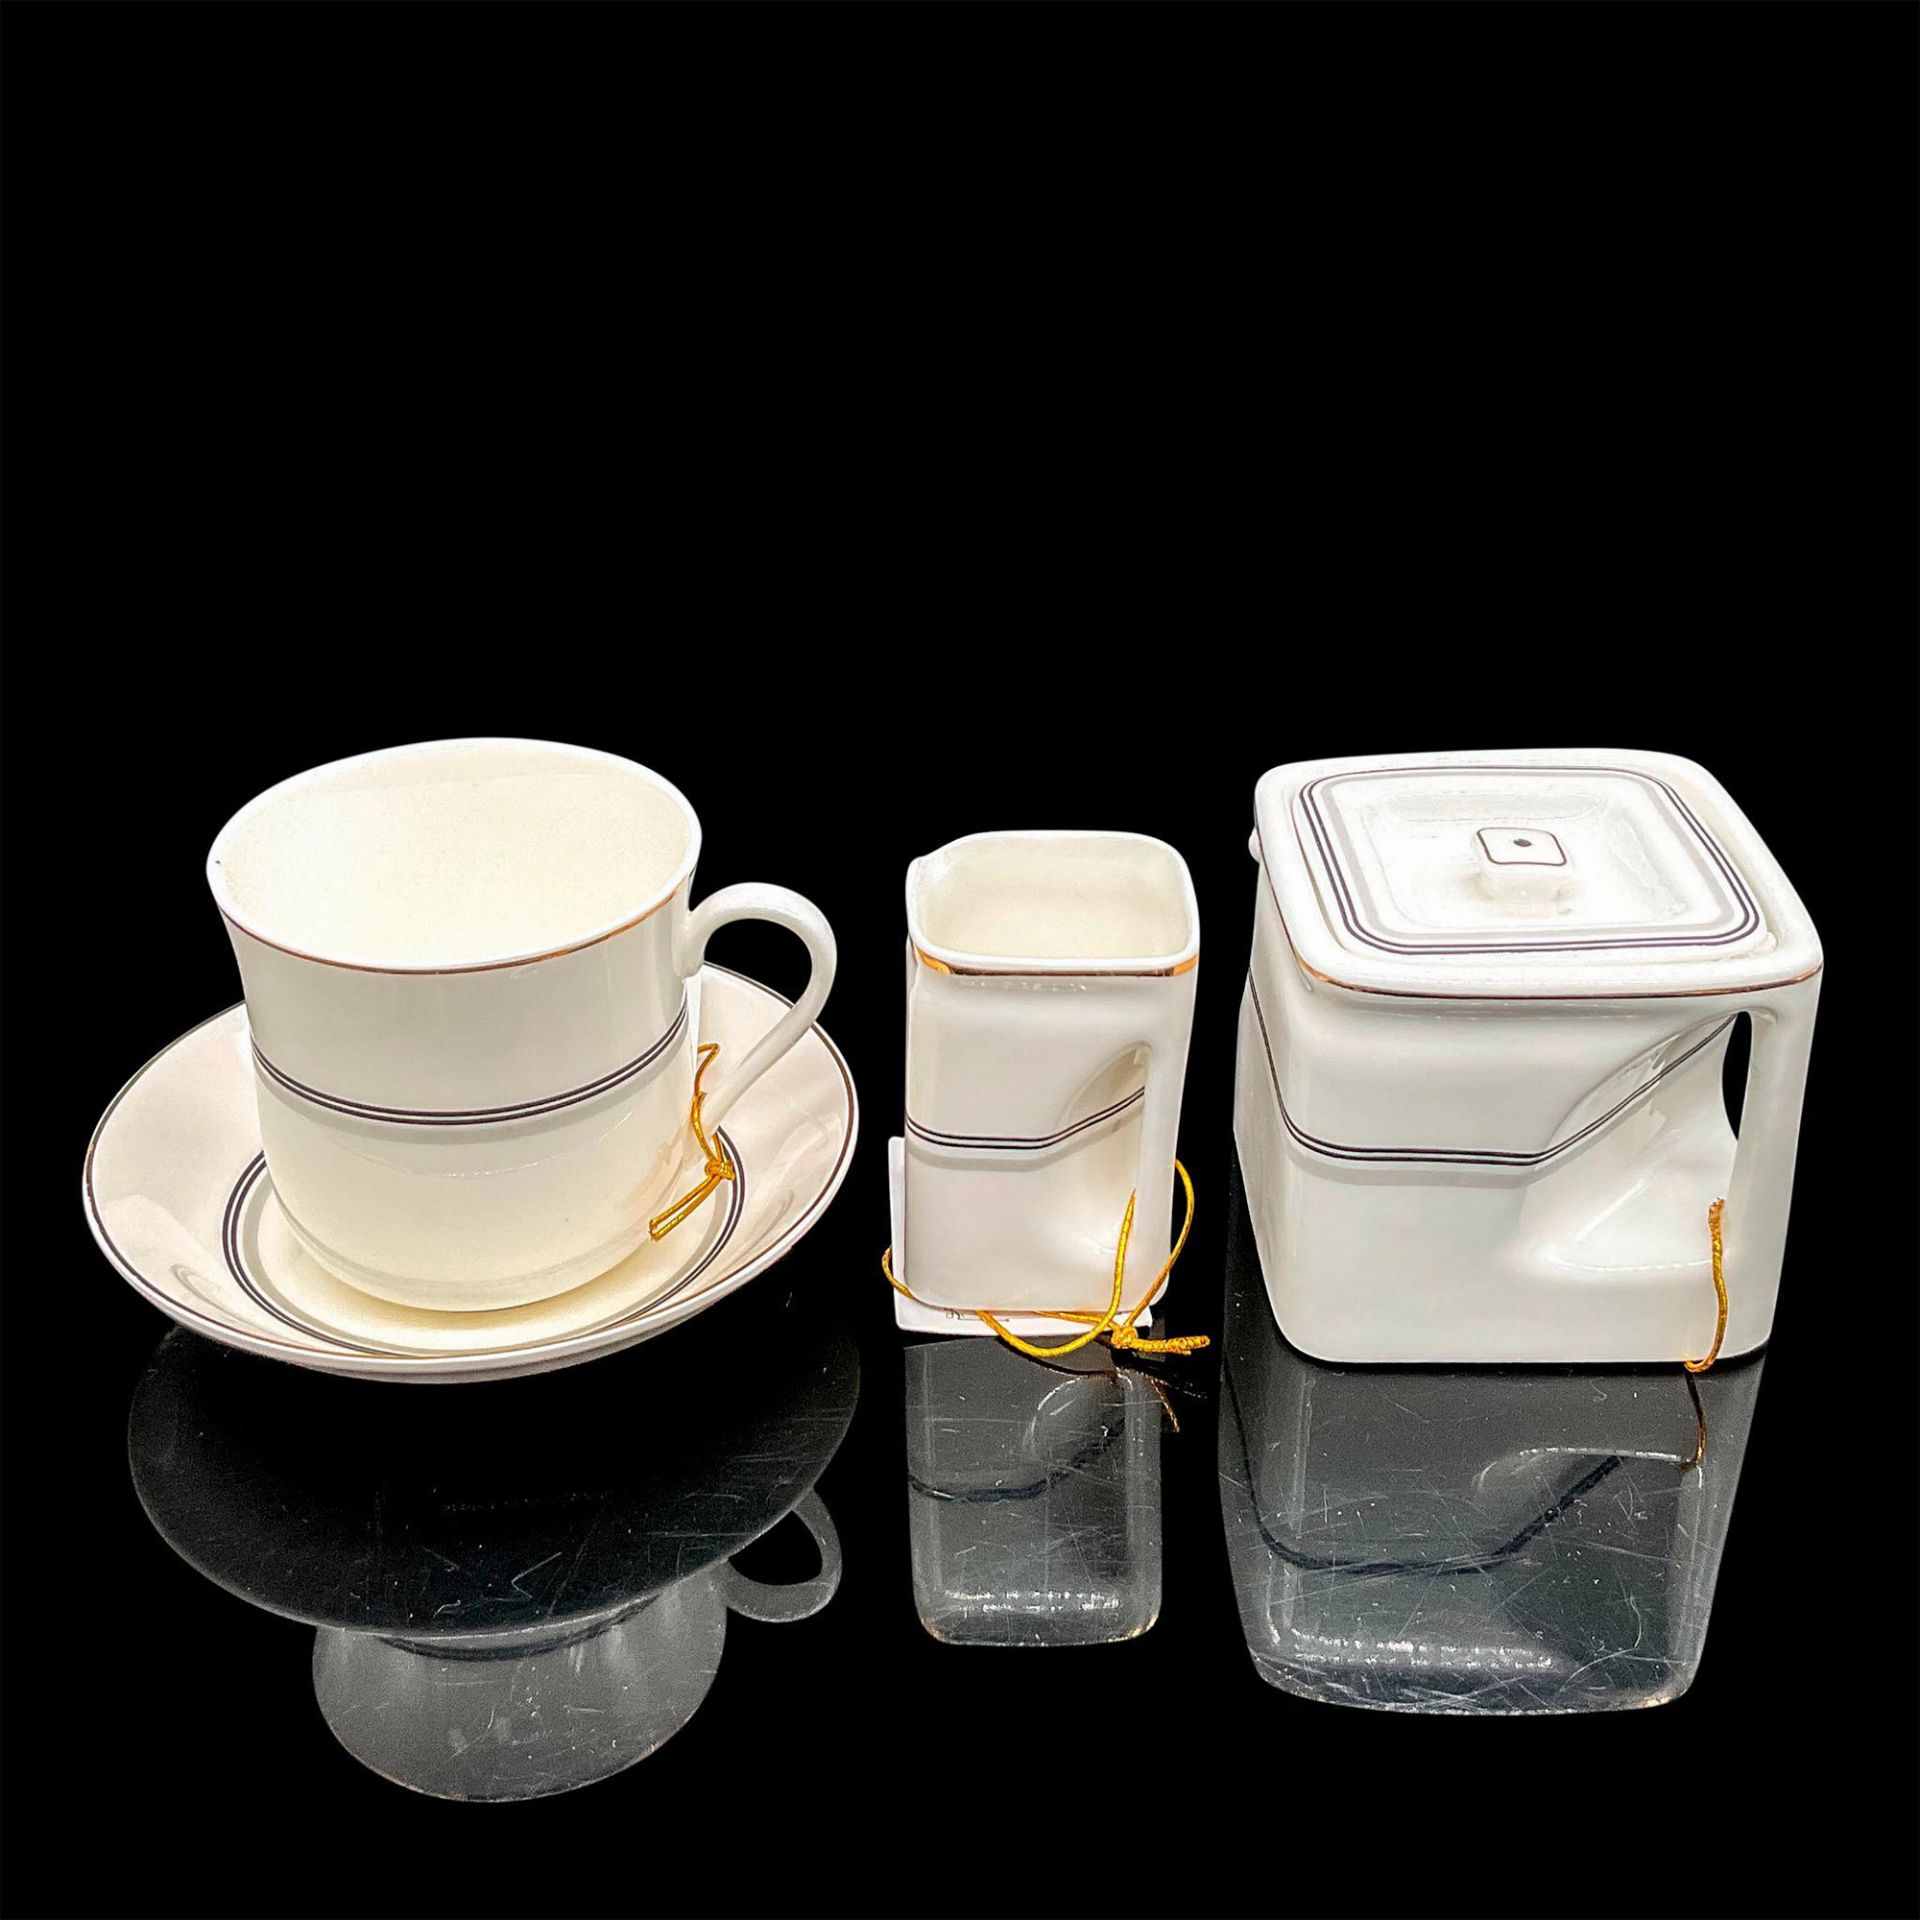 6pc Tea Serving Set, Queen Mary and Titanic Replicas - Image 10 of 16